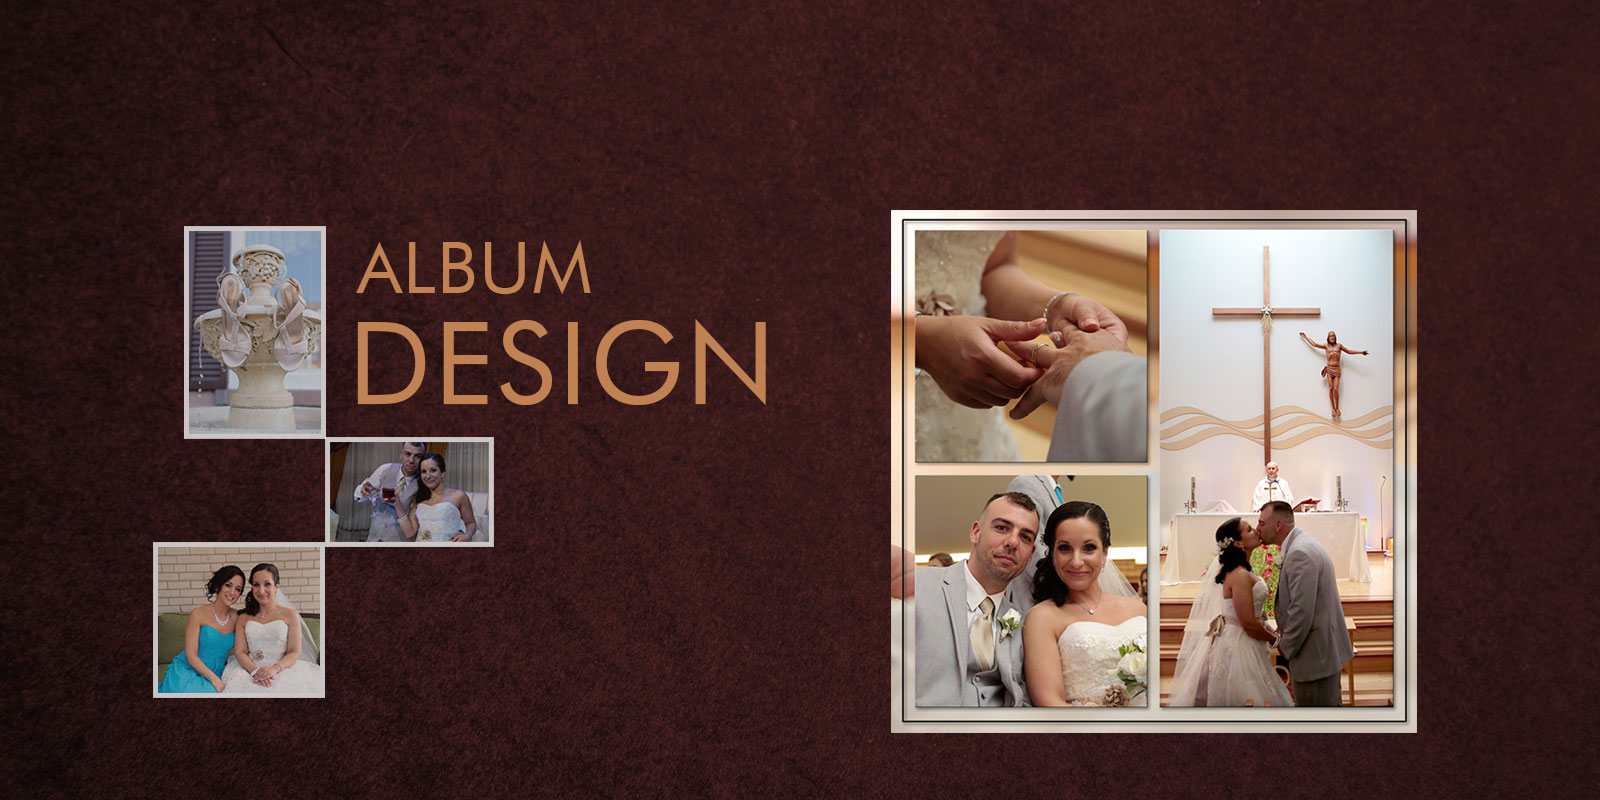 How to Get the Most Out of Your Wedding Album Design?